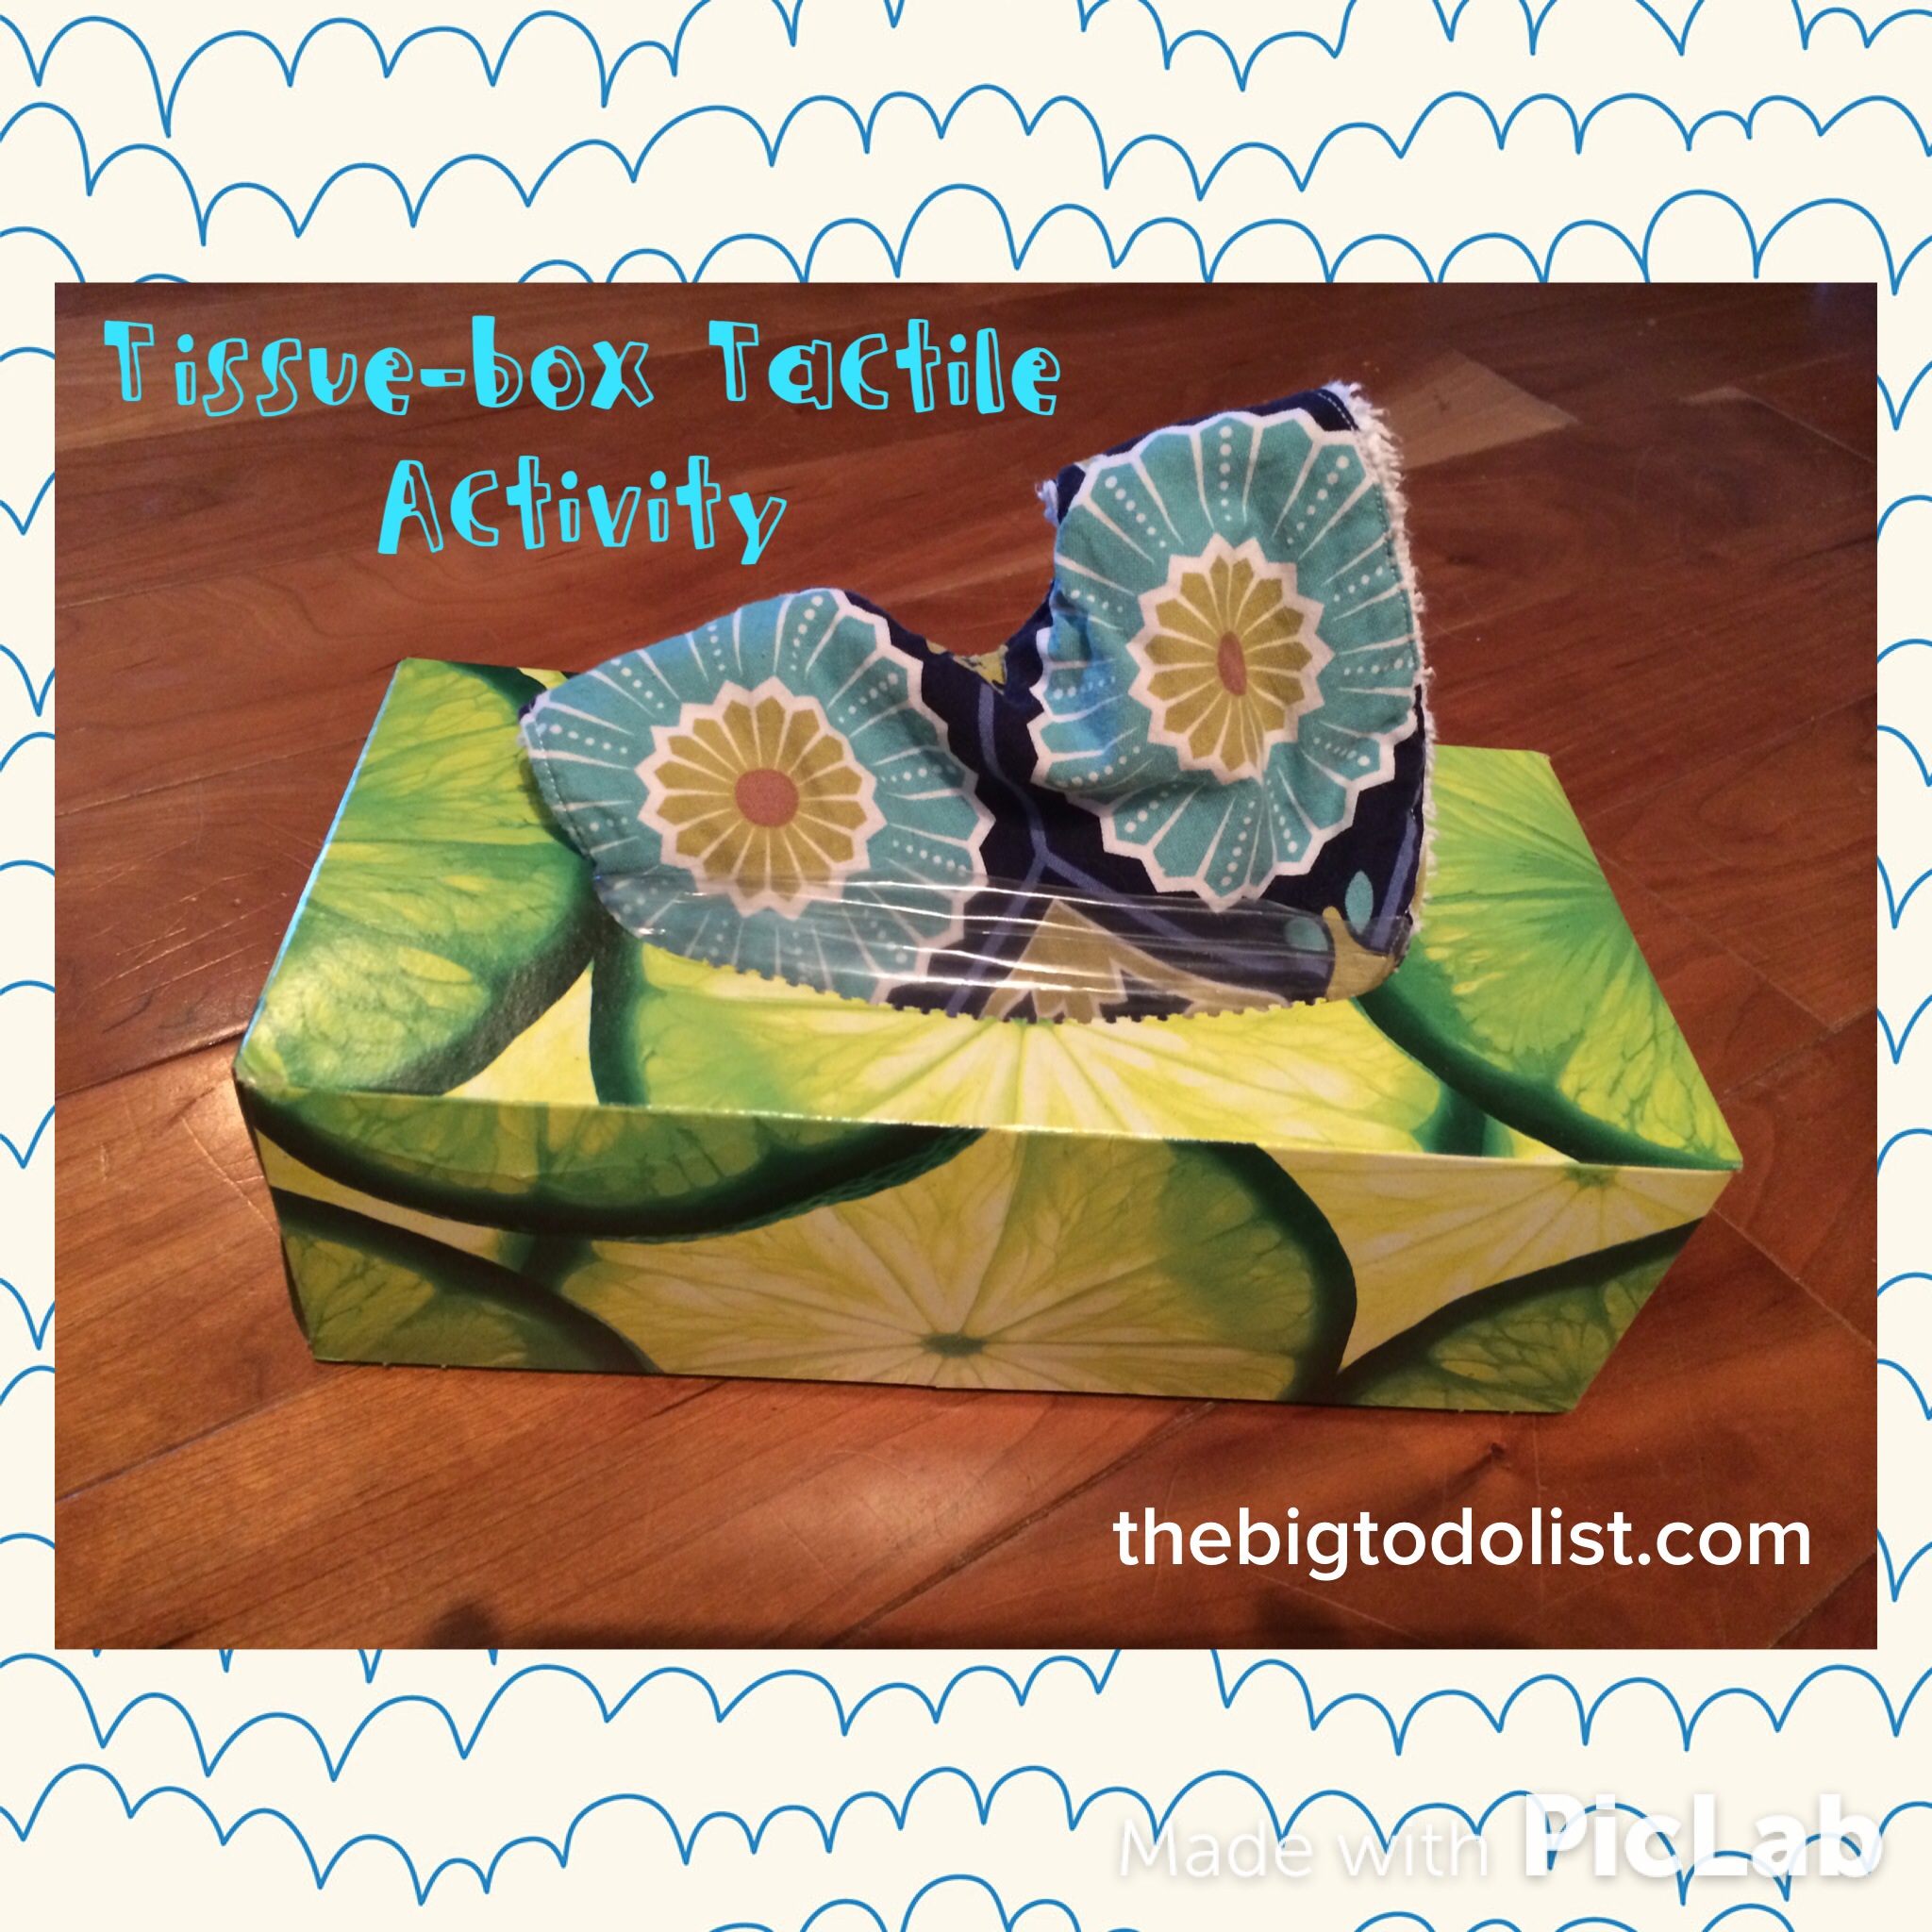 Tissue-box tactile activity for babies and toddlers